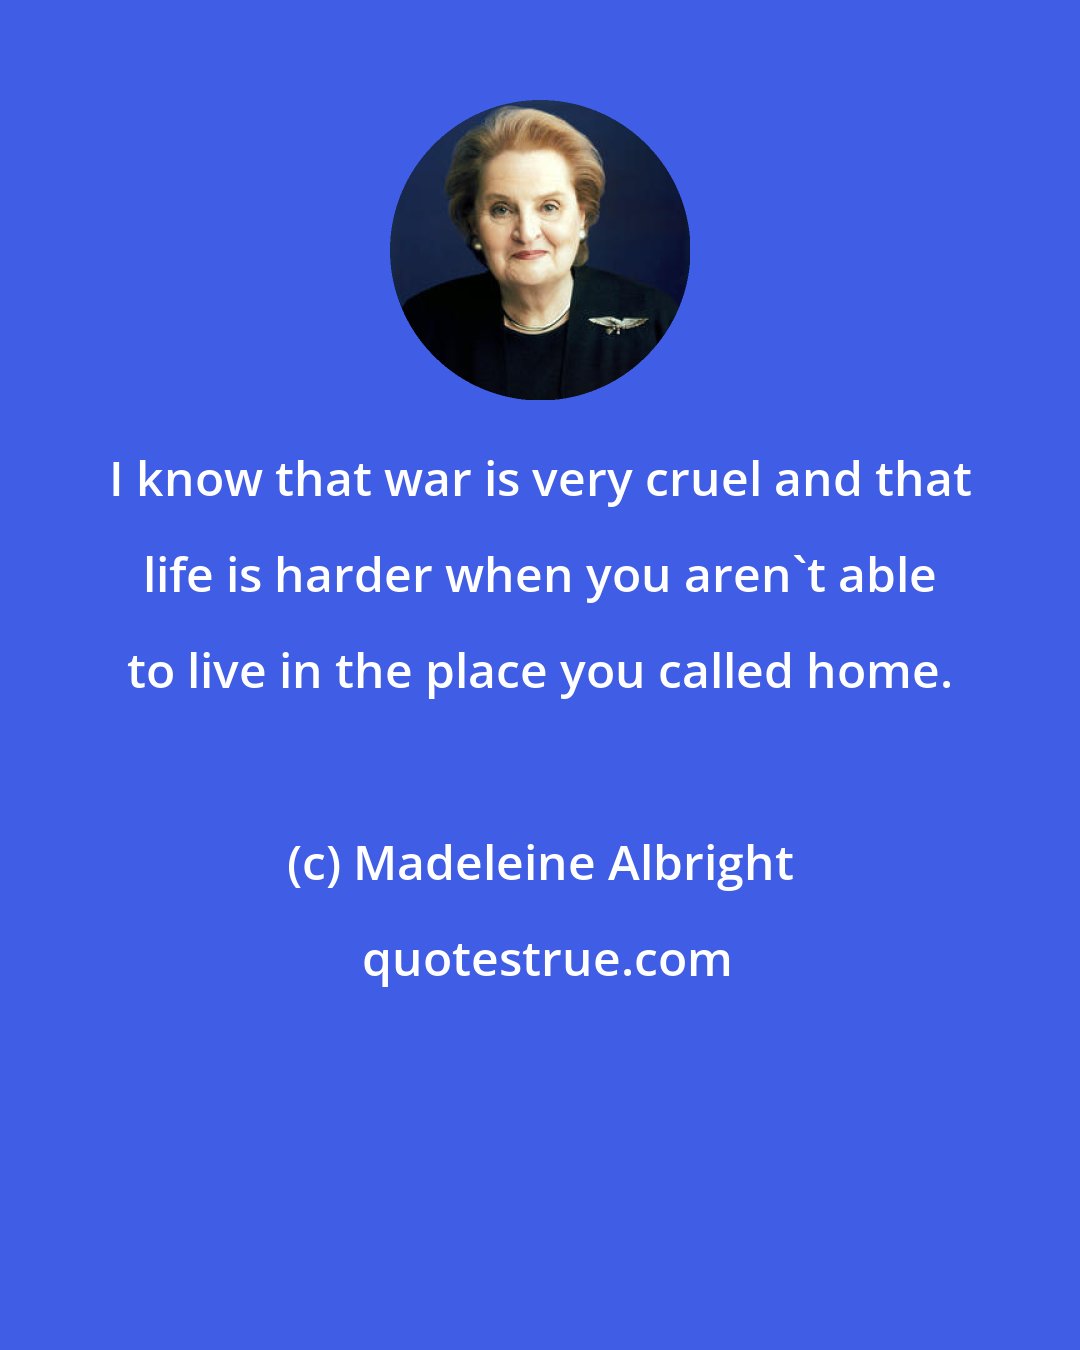 Madeleine Albright: I know that war is very cruel and that life is harder when you aren't able to live in the place you called home.